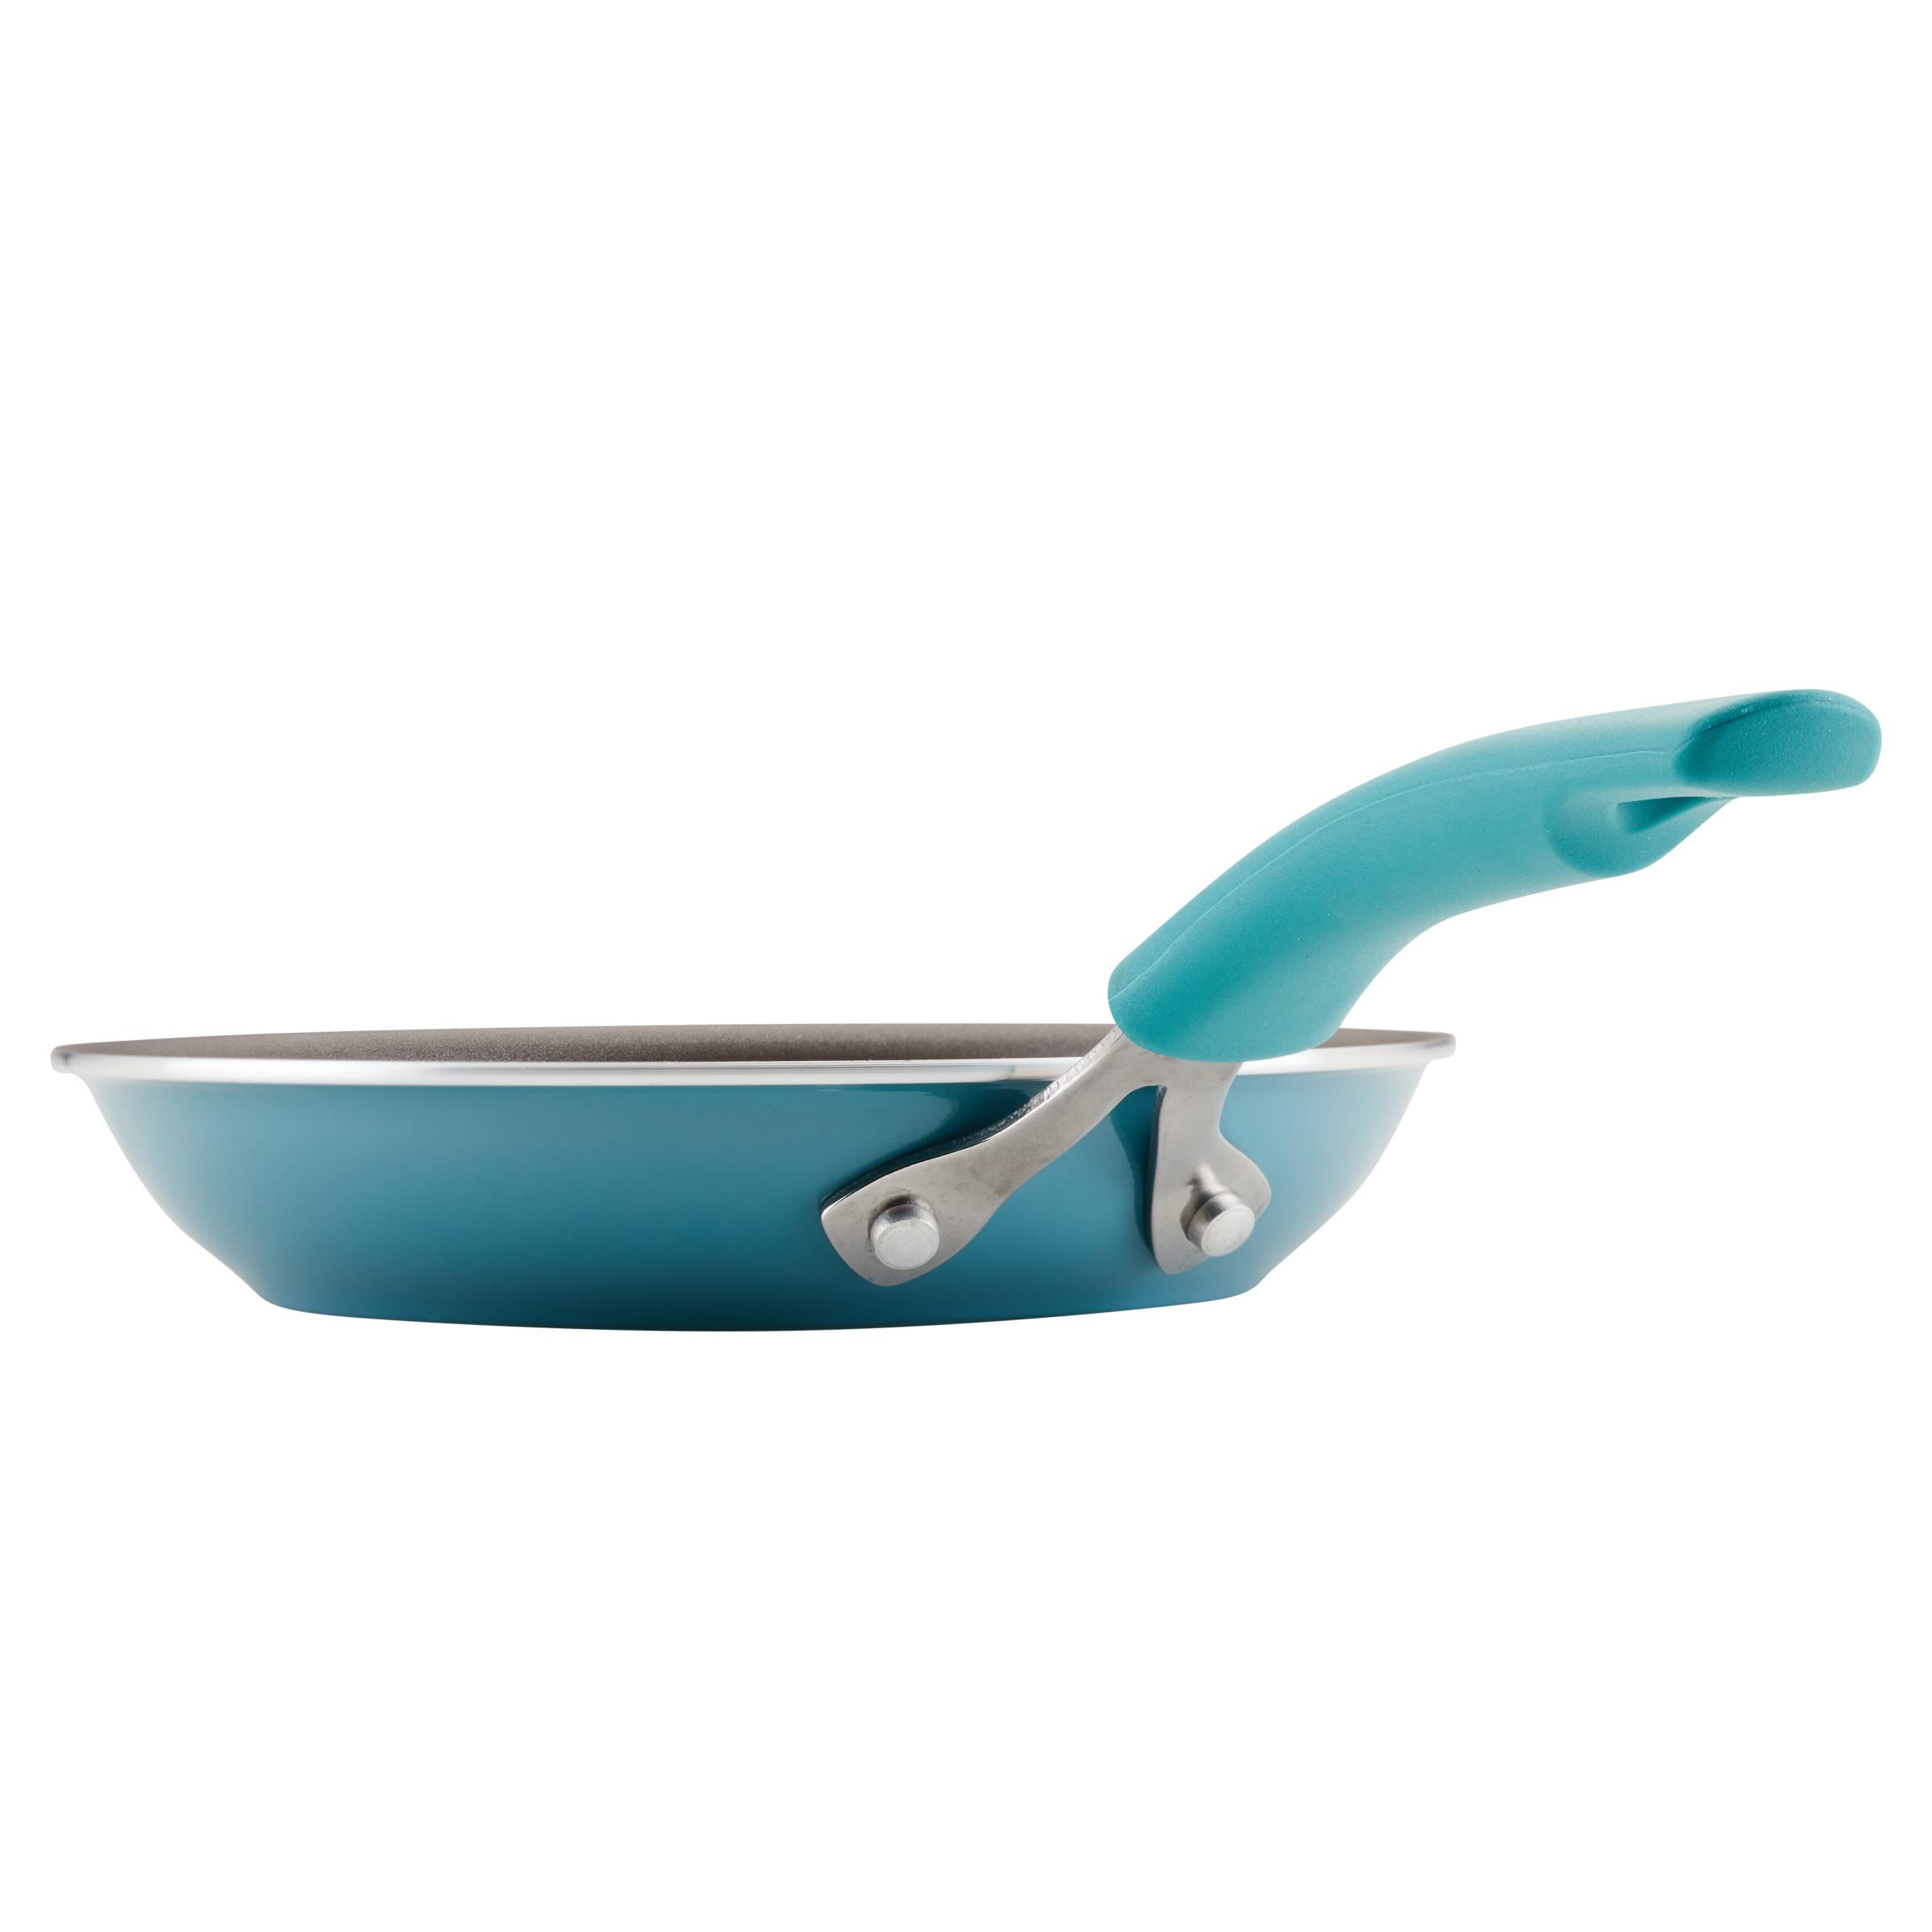 Rachael Ray Cook + Create Nonstick Frying Pan/Skillet, 8.5 Inch, Agave Blue